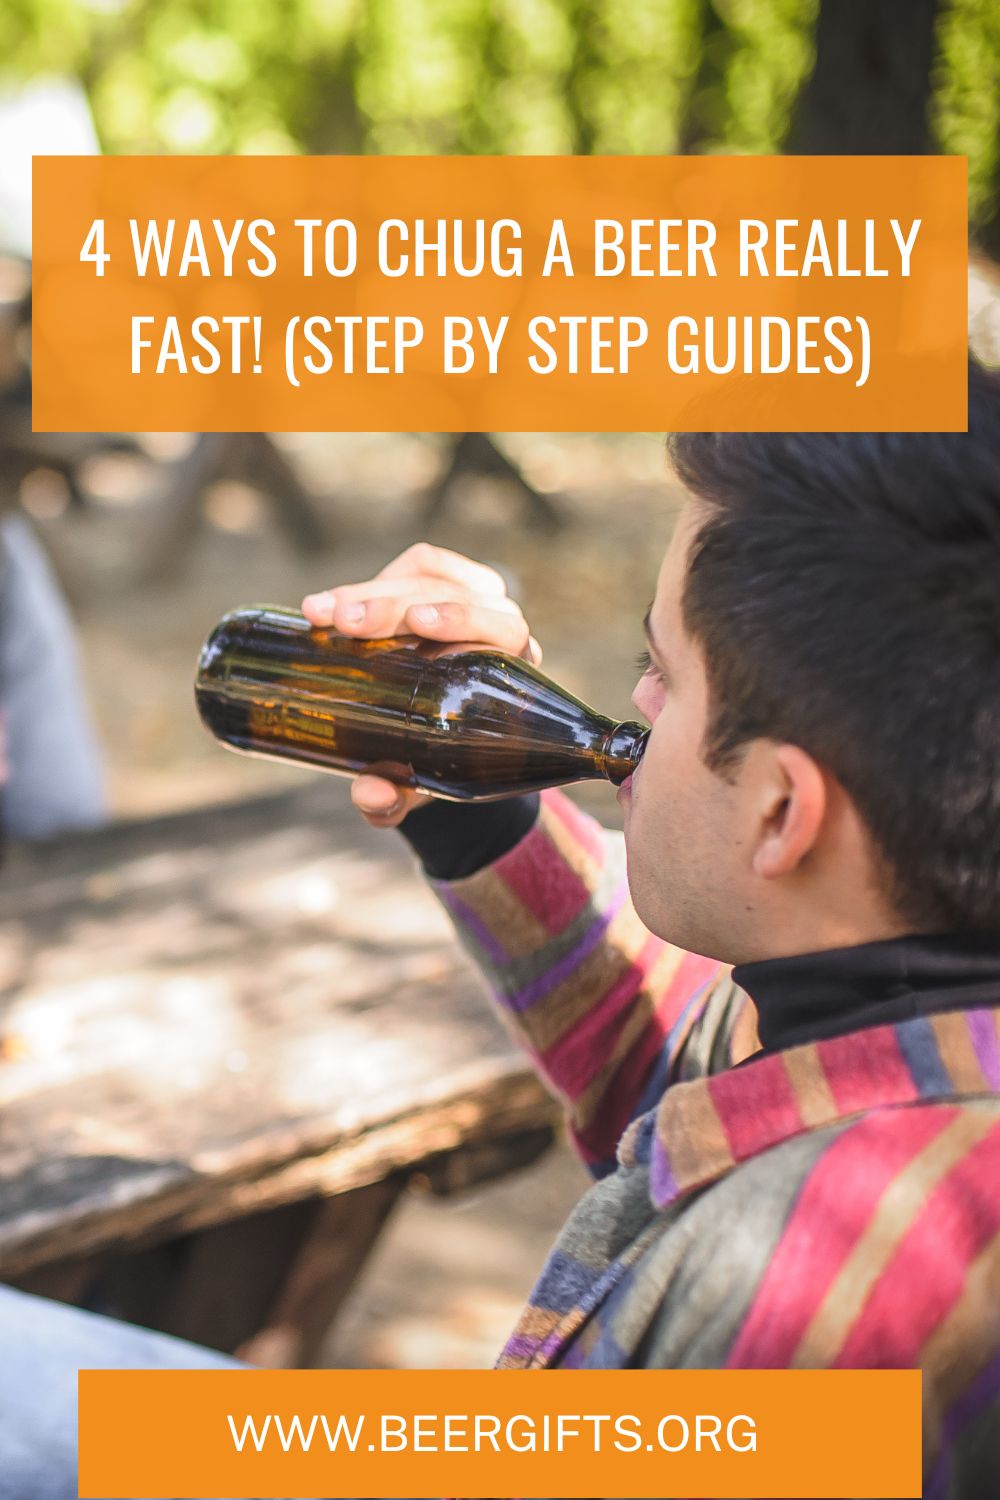 4 Ways to Chug a Beer Really Fast! (Step by Step Guides)1